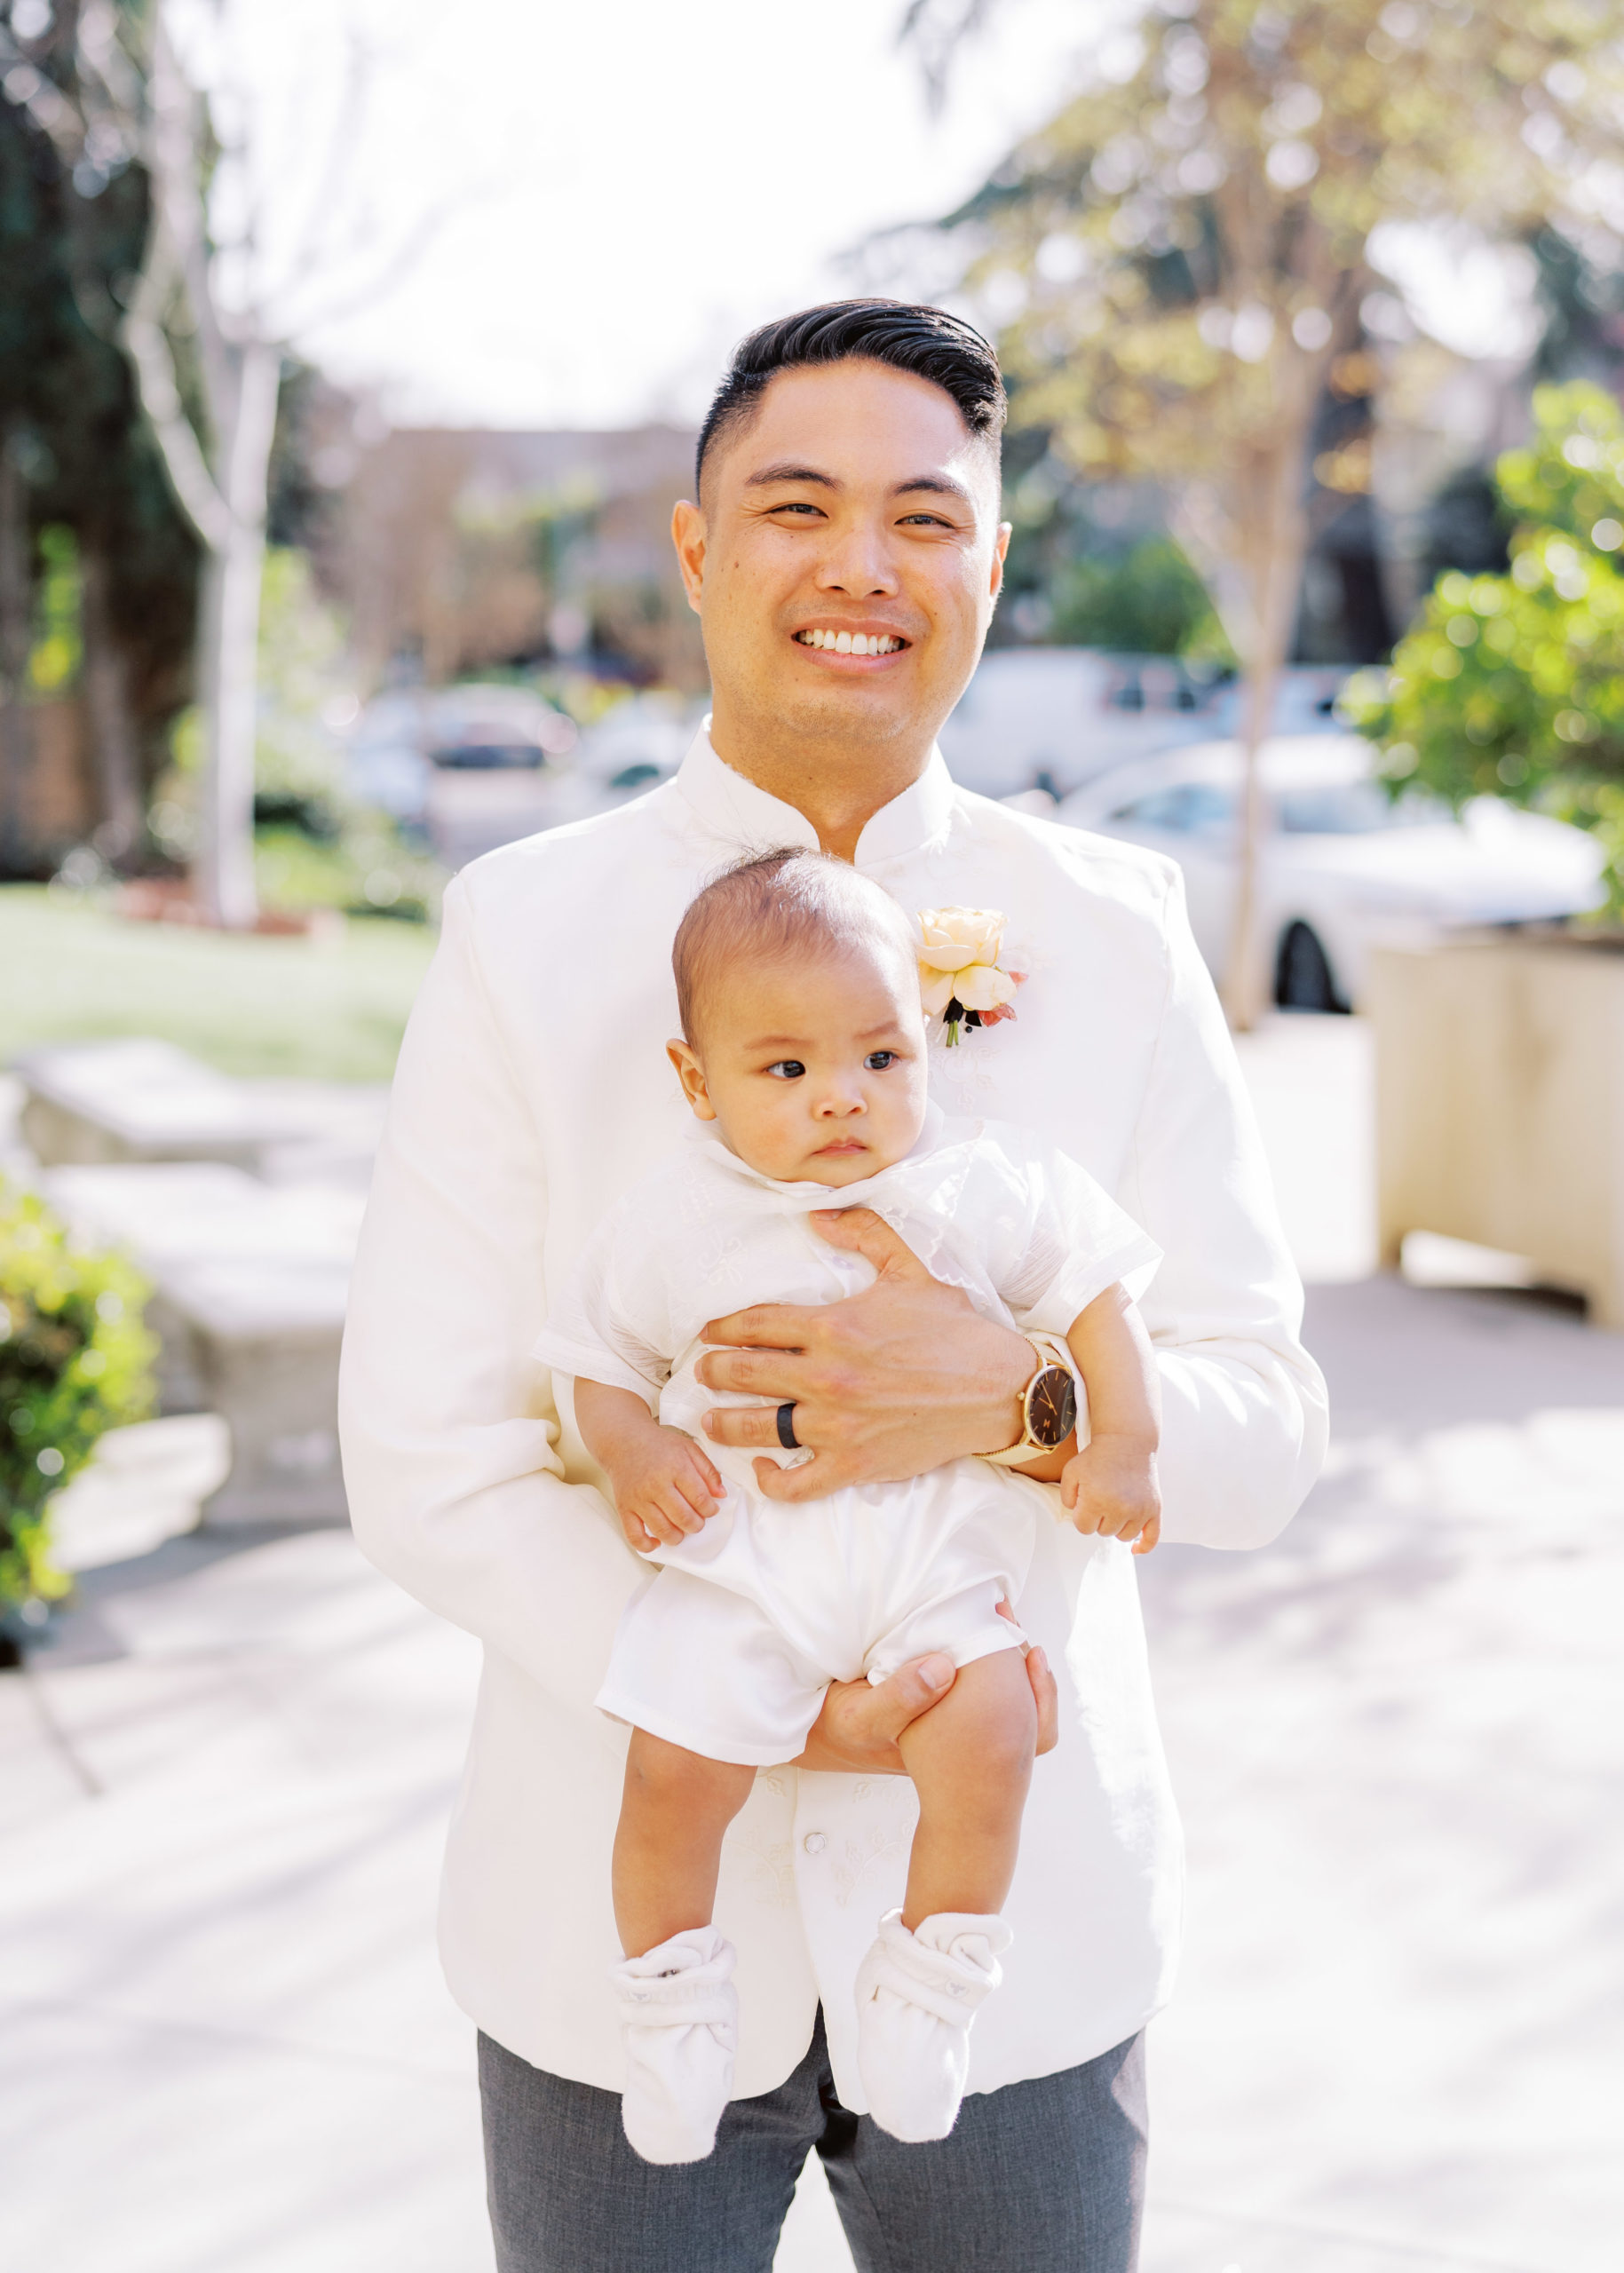 groom in traditional white wedding attire holds baby during wedding portraits 